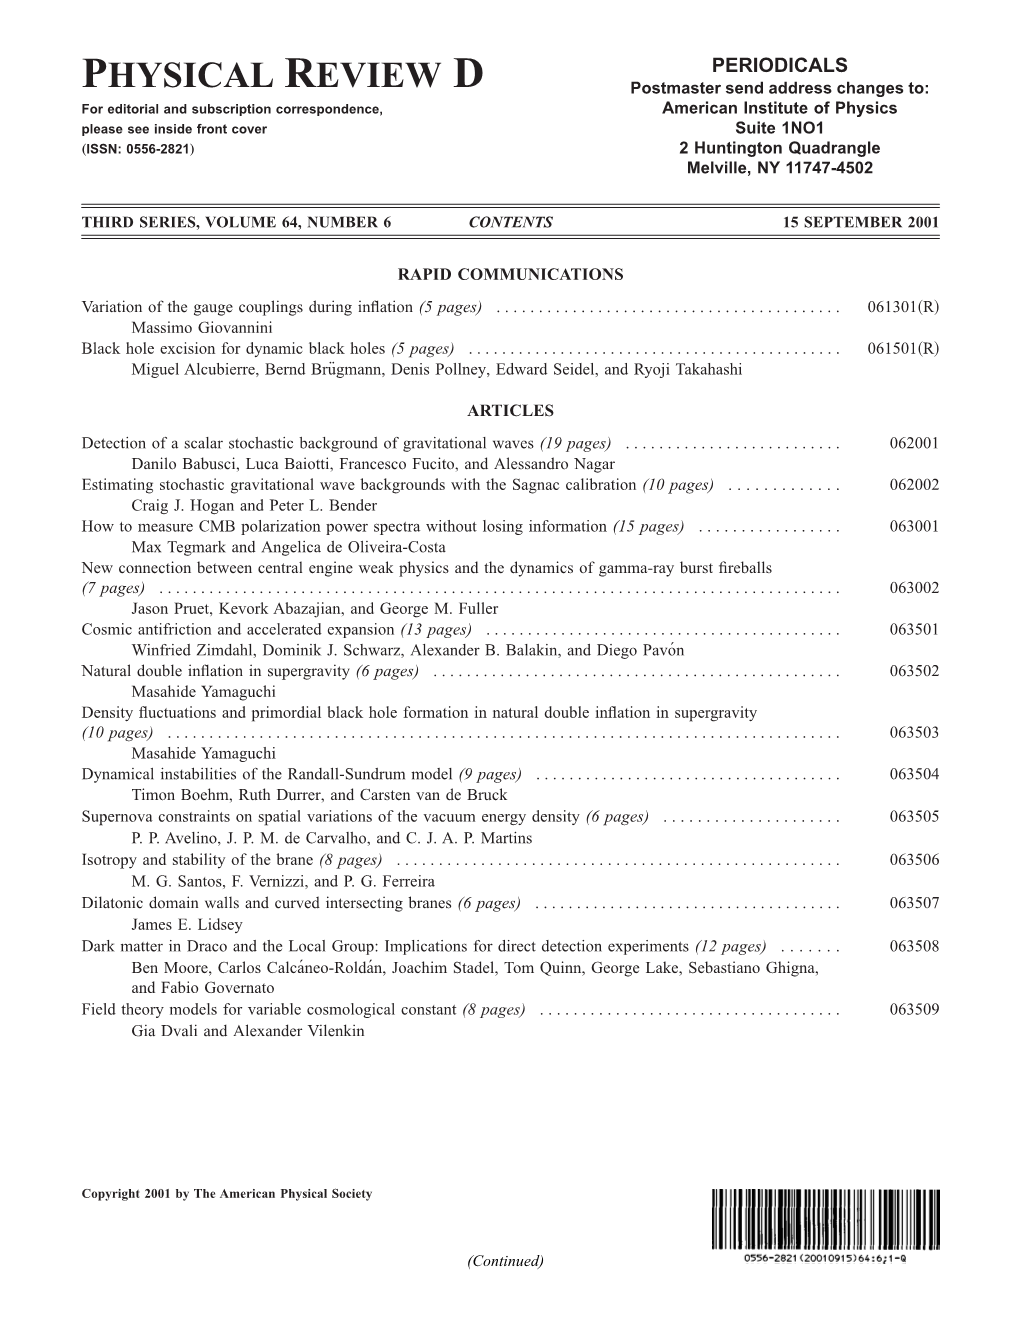 Table of Contents (Print)